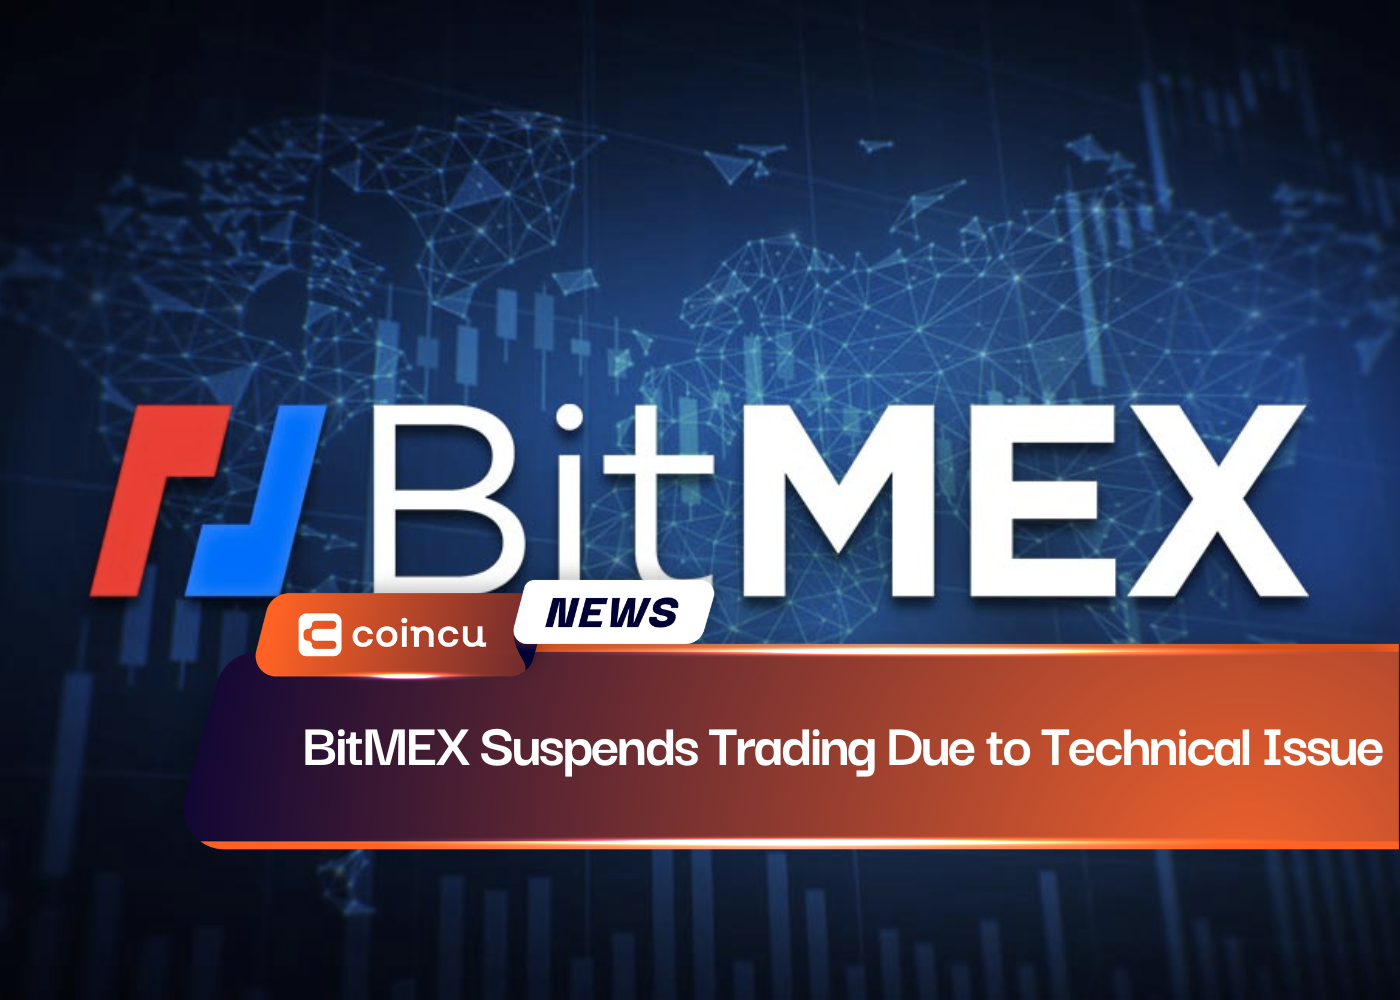 BitMEX Suspends Trading Due to Technical Issue